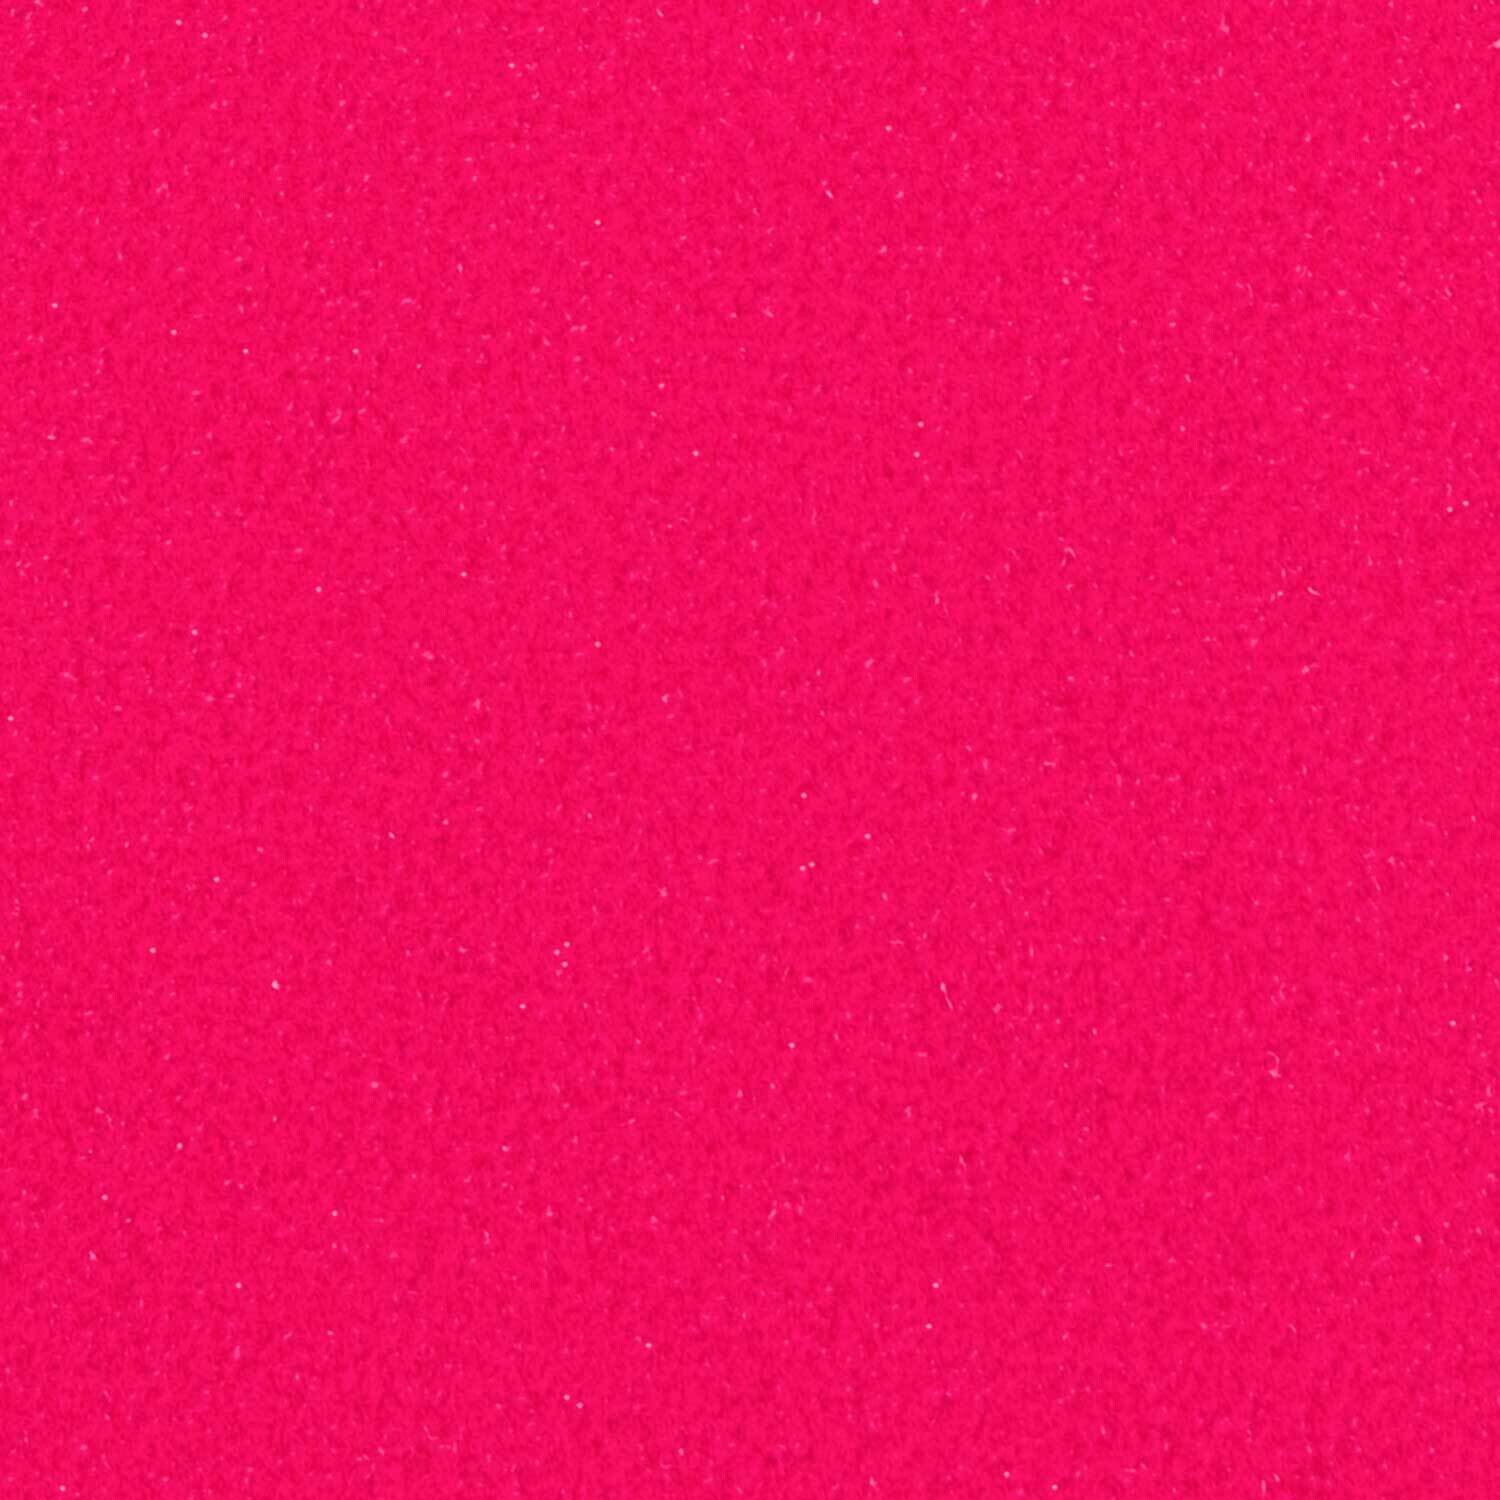 CLEARANCE Siser Stripflock Pro Fluorescent Pink, PRODUCT SIZE: 15&quot; X 1 YD ROLL